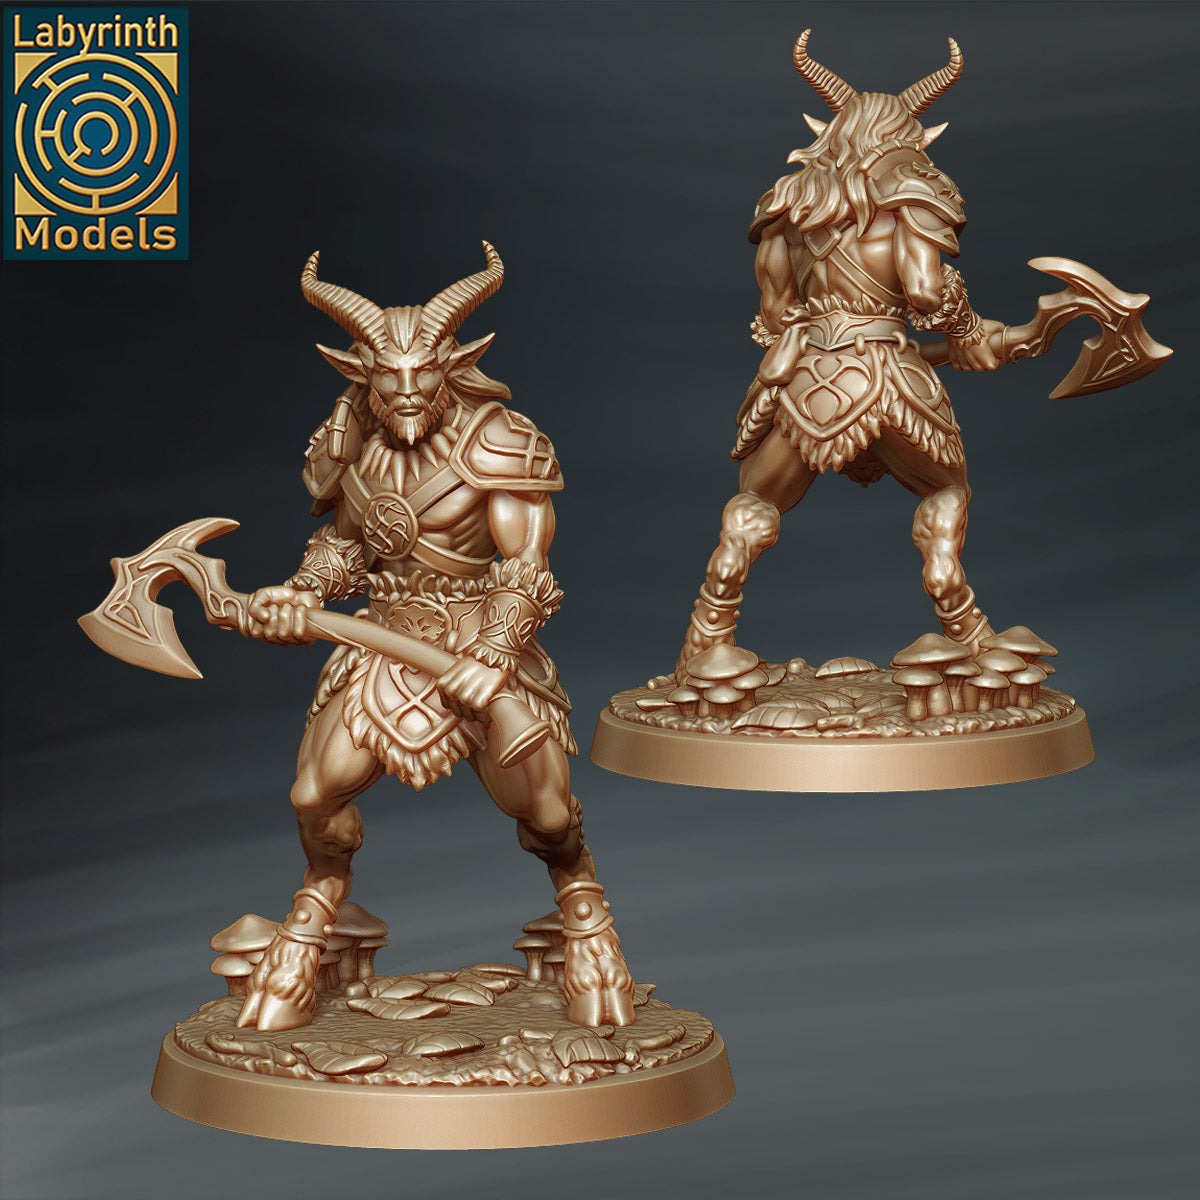 Fauns by Labyrinth Models